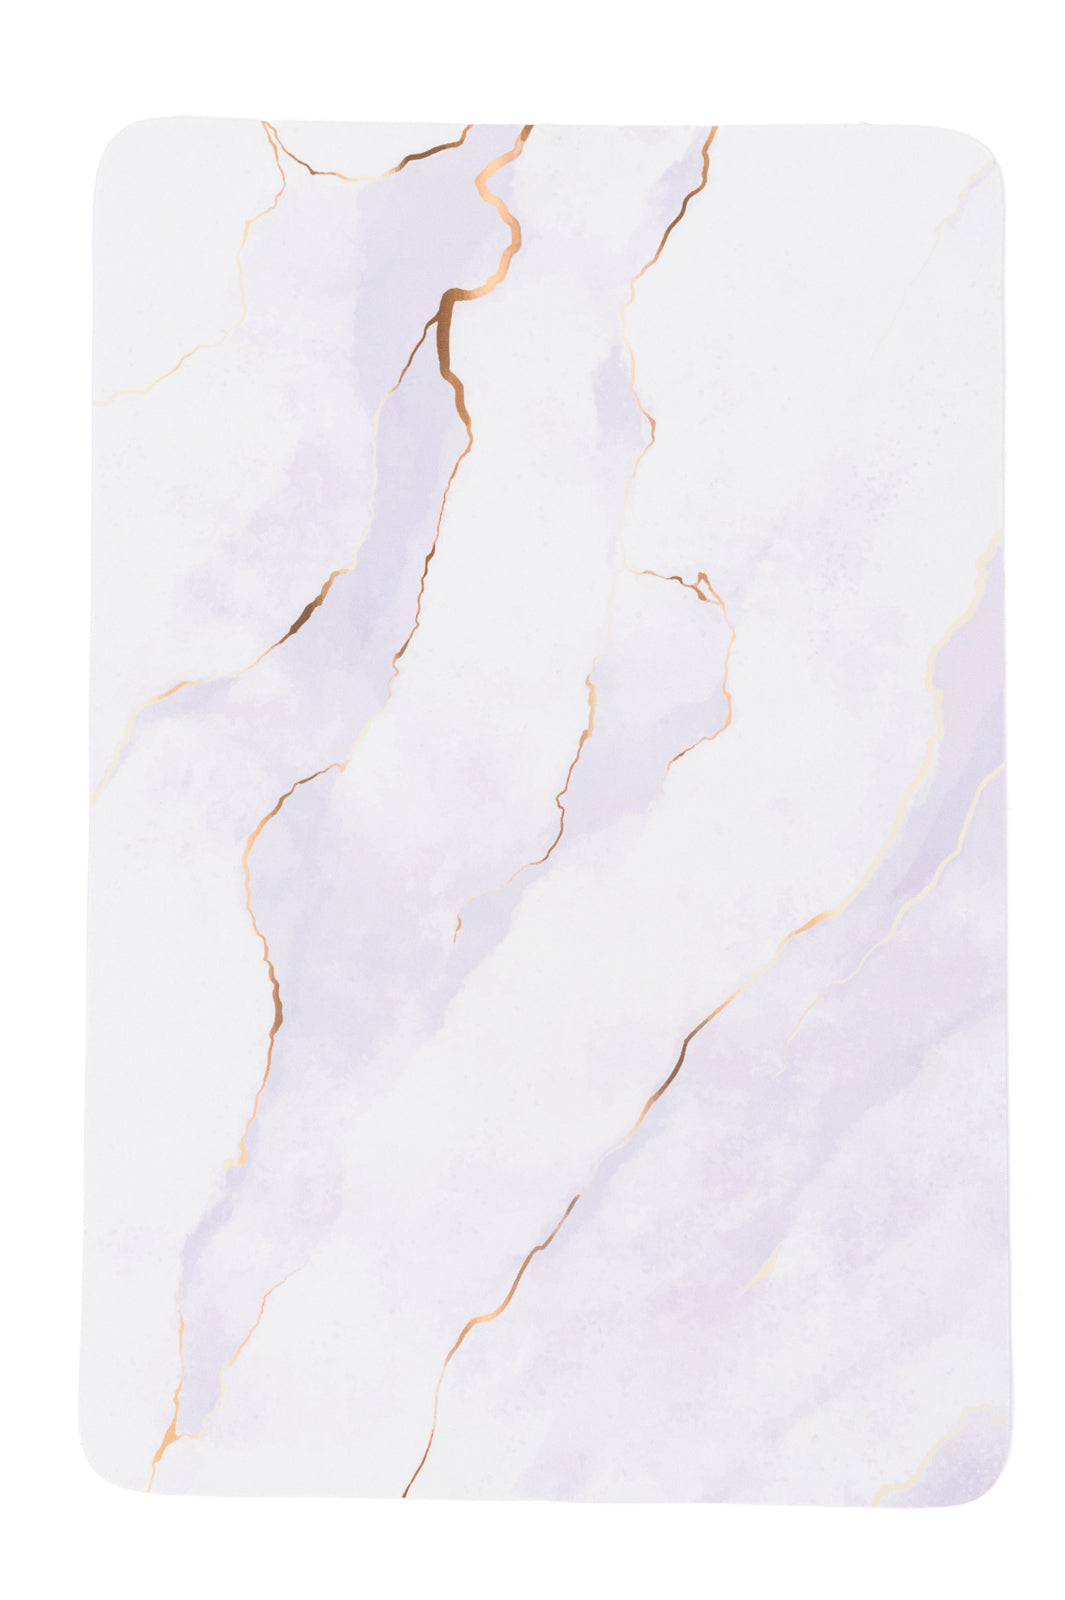 Say No More Luxury desk pad in White Marble